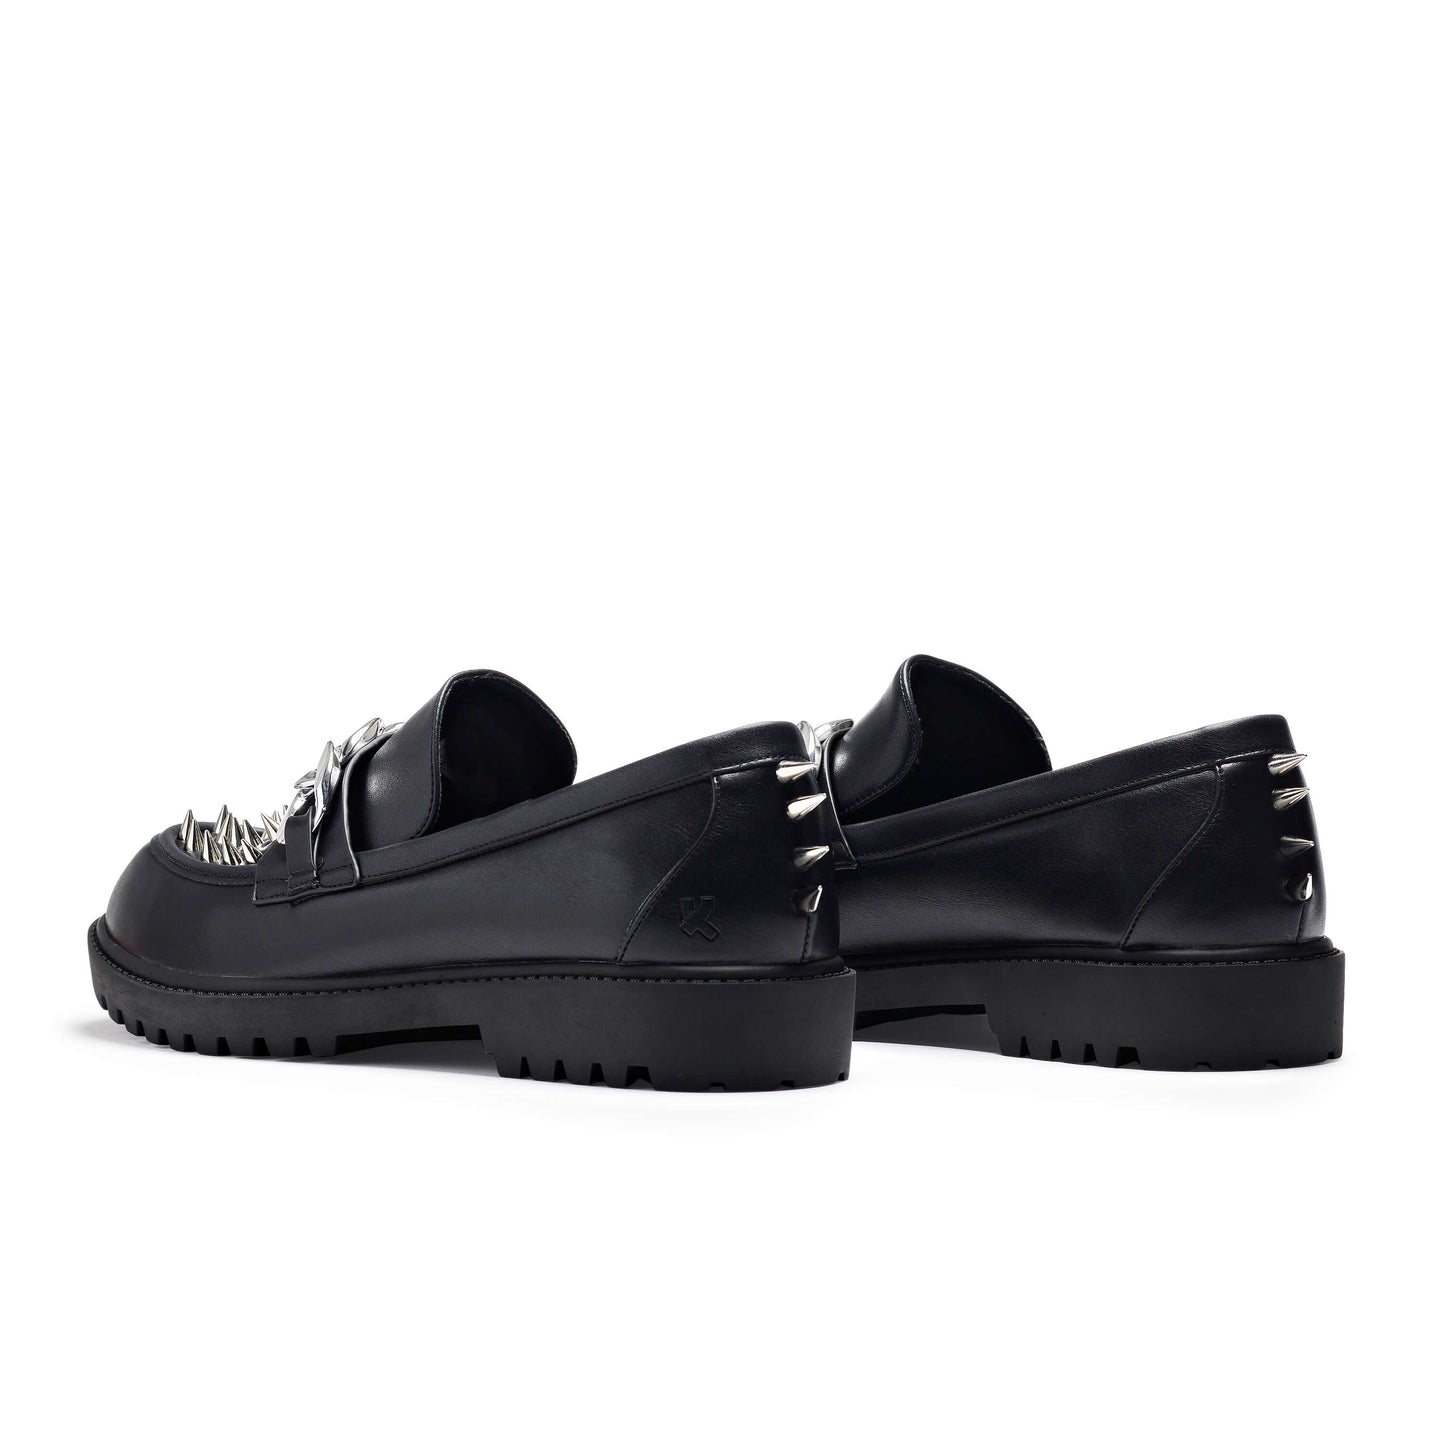 The Grave Warden Men's Spiked Loafers - Shoes - KOI Footwear - Black - Back View